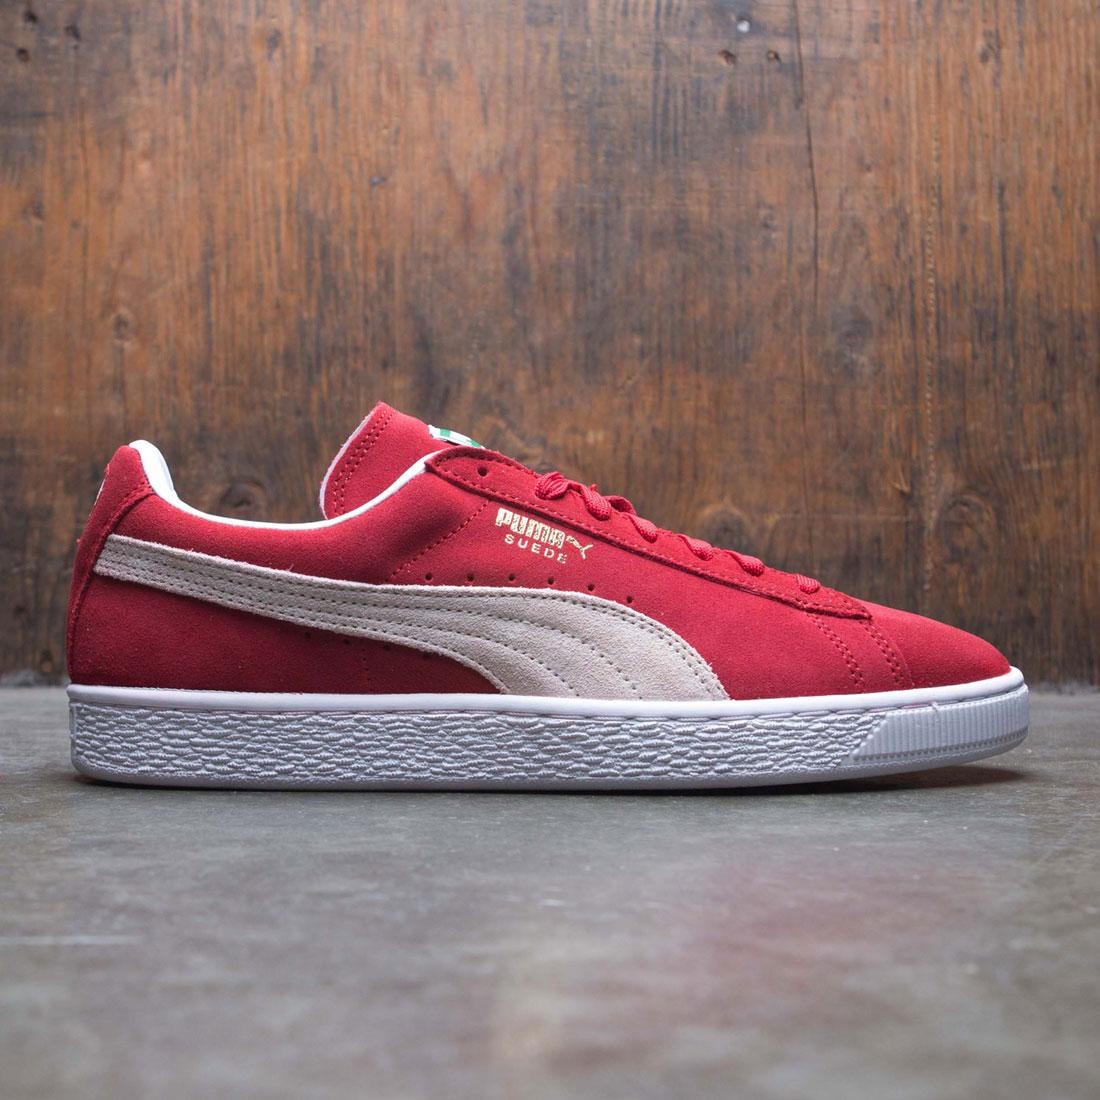 red and white puma sneakers